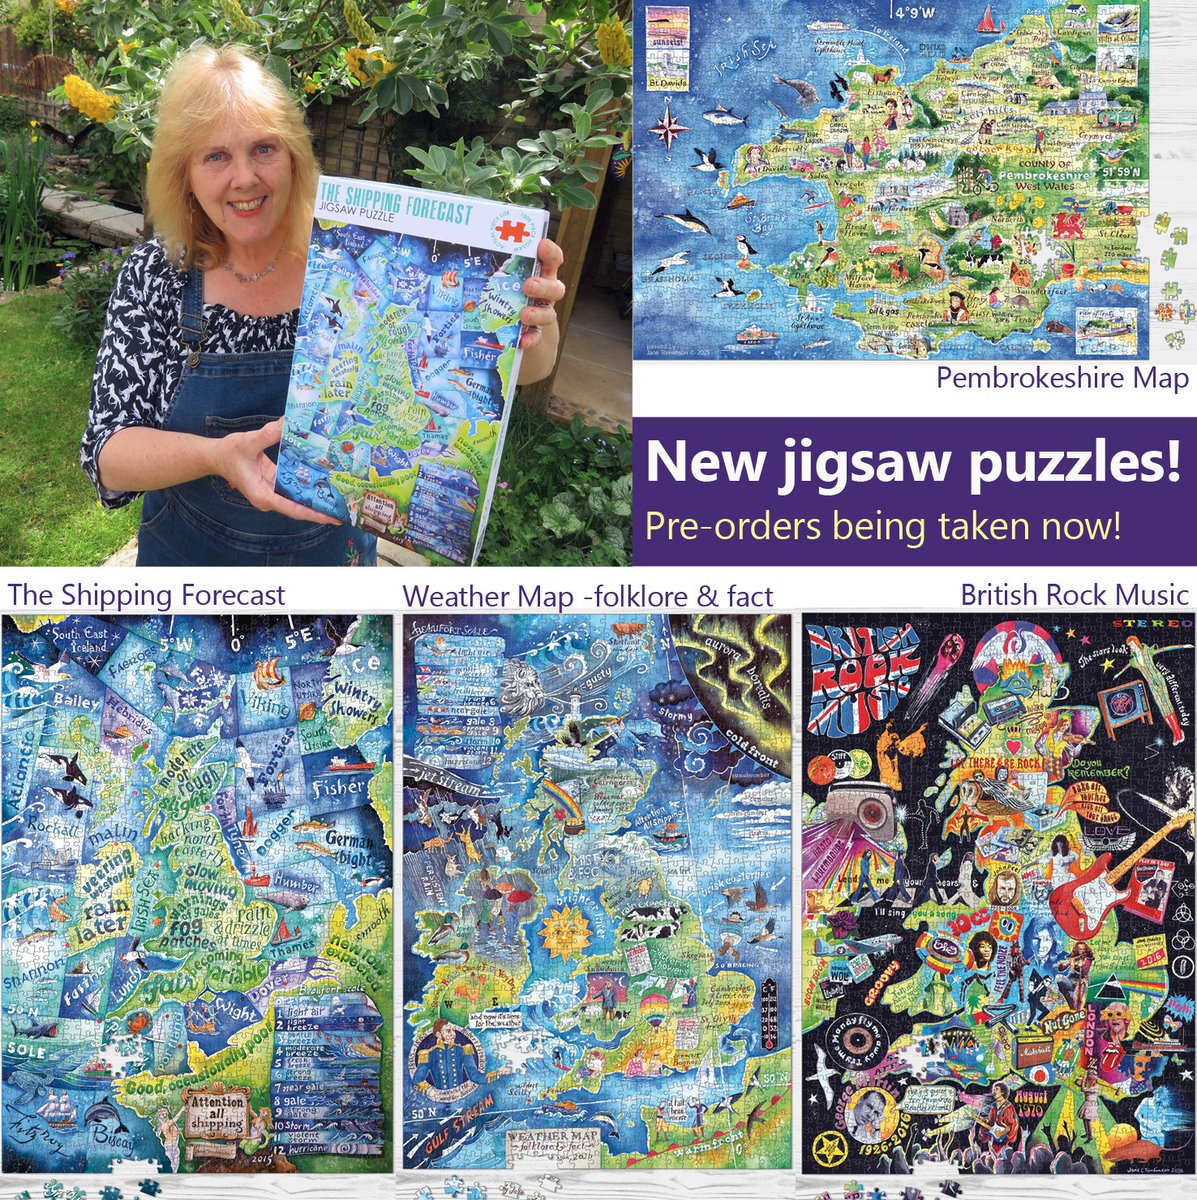 🧩At last! I'm taking pre-orders for a new range of high quality 1000-pc #jigsawpuzzles of some of my #paintings, inc this one of the #shippingforecast.
🧩See: janetomlinson.com/jigsaw-puzzles/  
#jigsawpuzzlelover #puzzles #maps #puzzlelover #jigsawpuzzleaddict #ilovepuzzles #lovejigsaws